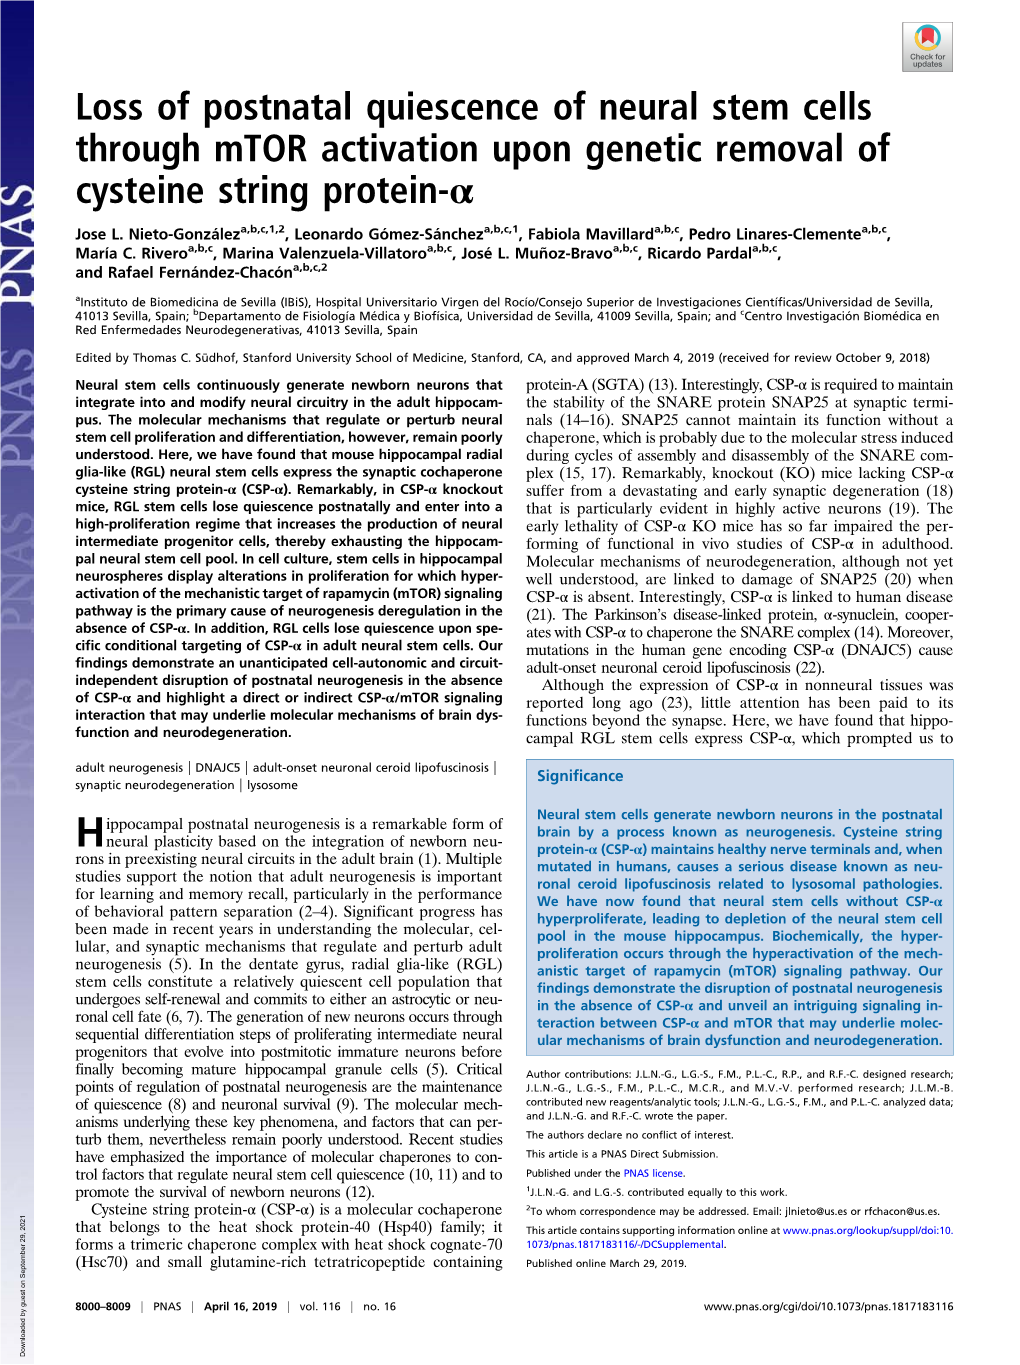 Loss of Postnatal Quiescence of Neural Stem Cells Through Mtor Activation Upon Genetic Removal of Cysteine String Protein-Α